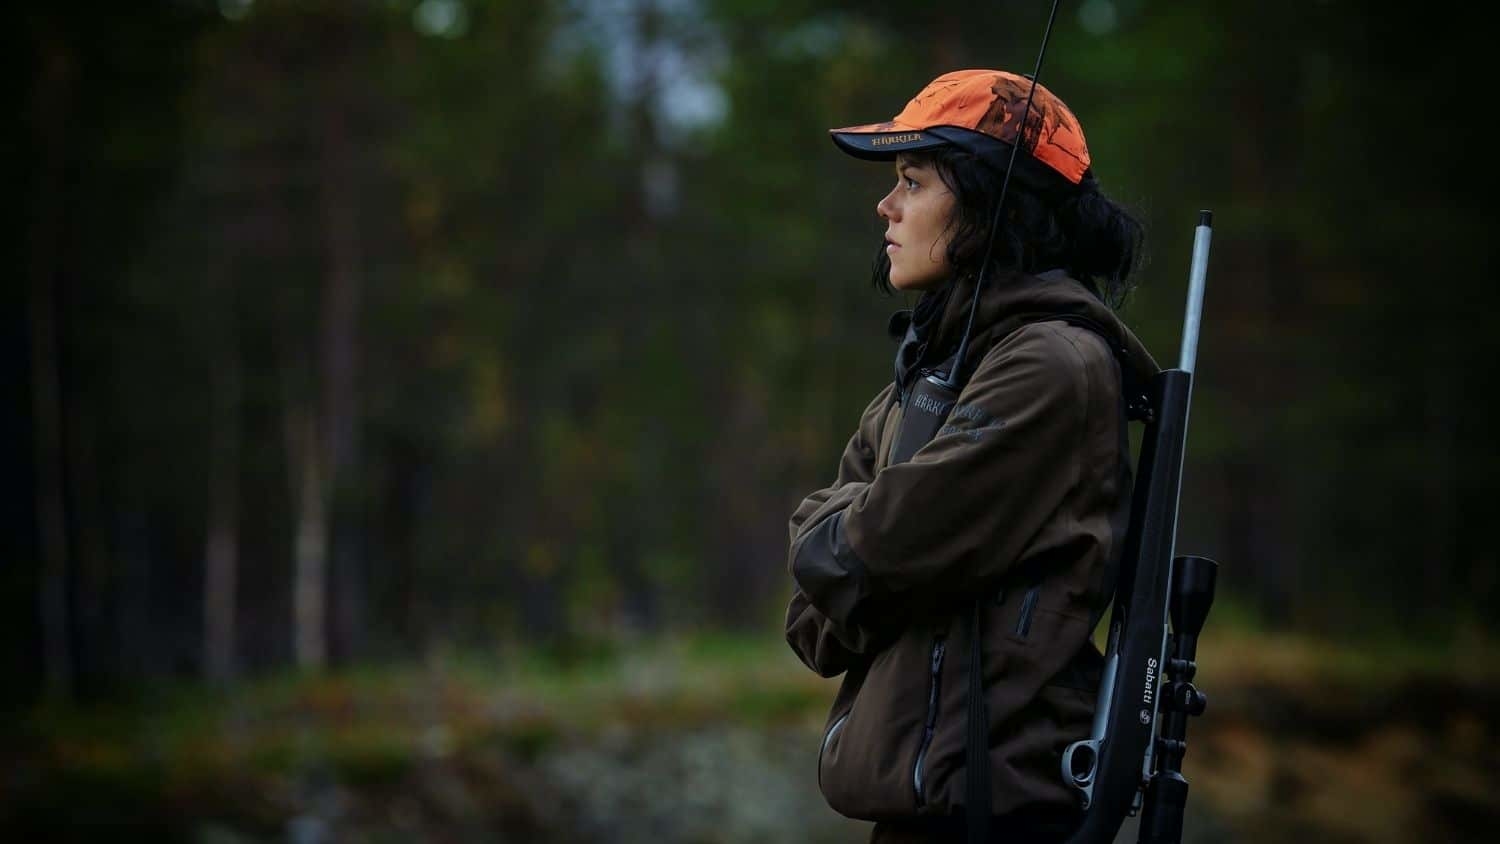 A female hunter - The Next Generation of Hunters Could Look Different - Parks, Recreation and Tourism Management at NC State University